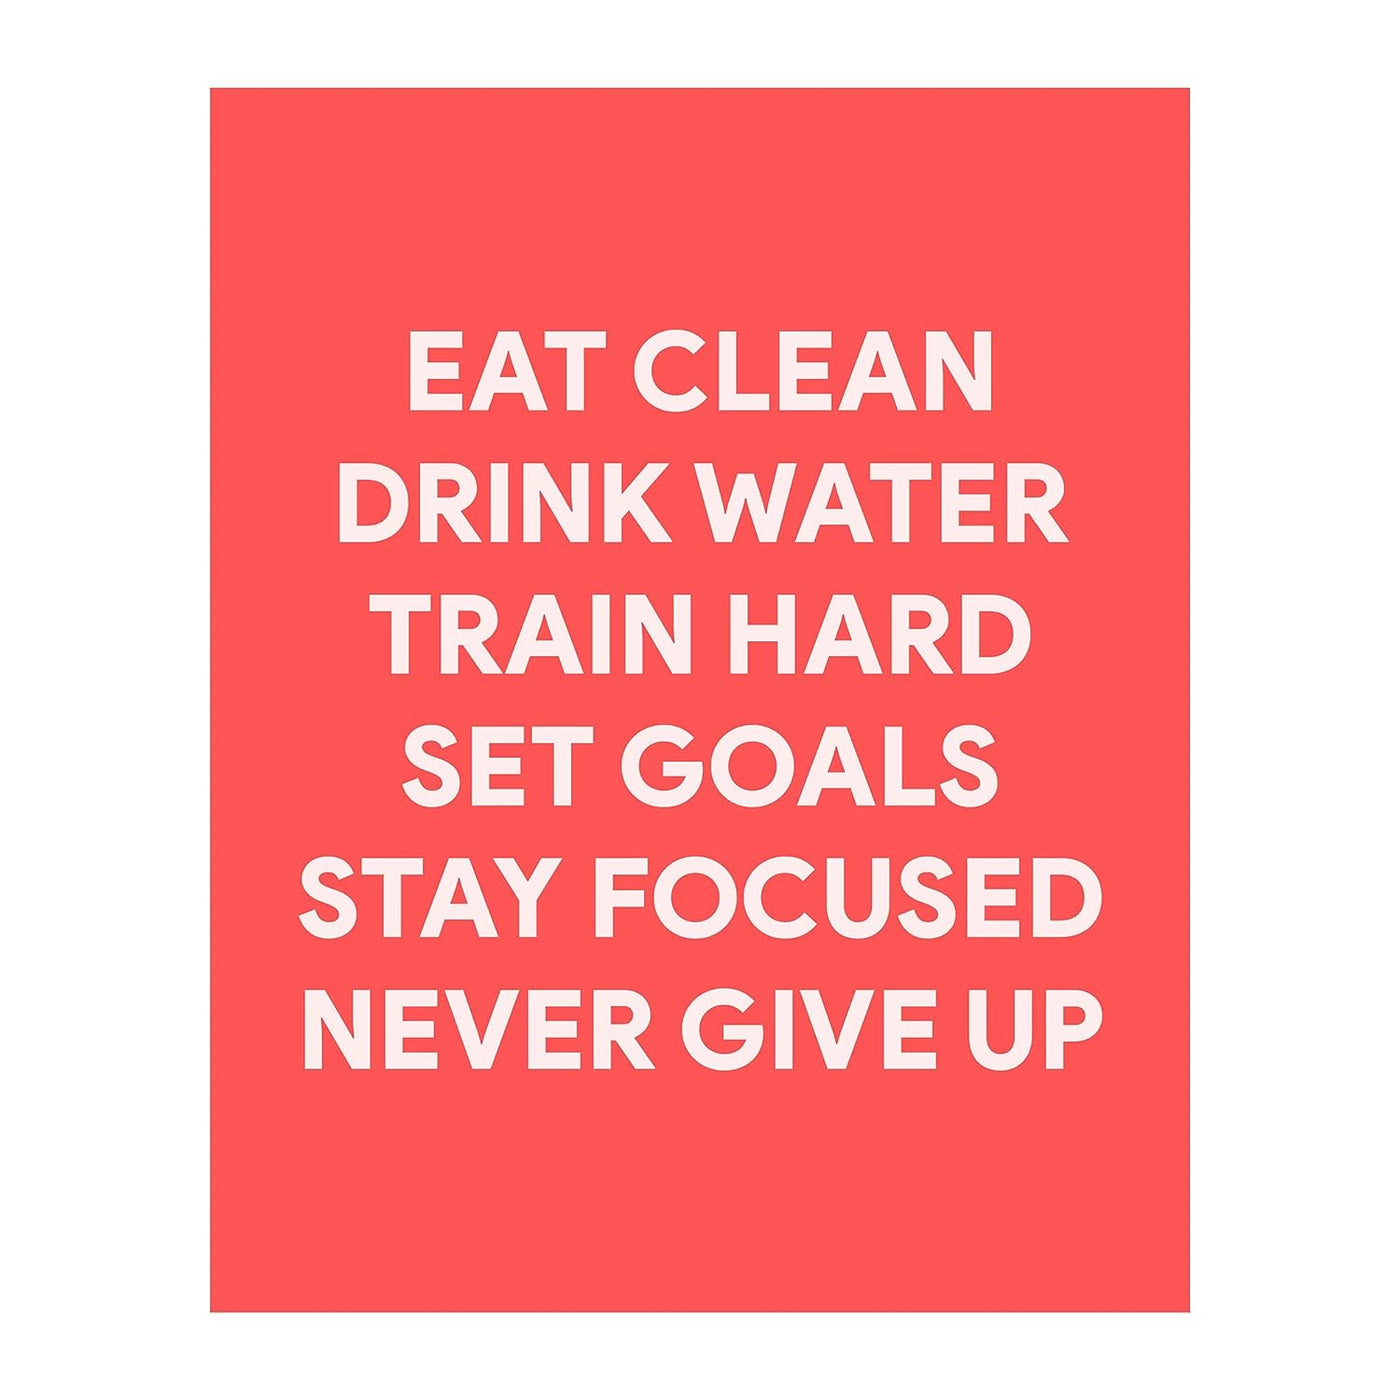 Eat Clean, Train Hard, Never Give Up-Motivational Exercise Sign -8 x 10" Wall Print-Ready to Frame. Modern Fitness Print for Home-Office-Gym-Yoga Studio-Locker Room Decor. Great Gift of Motivation!